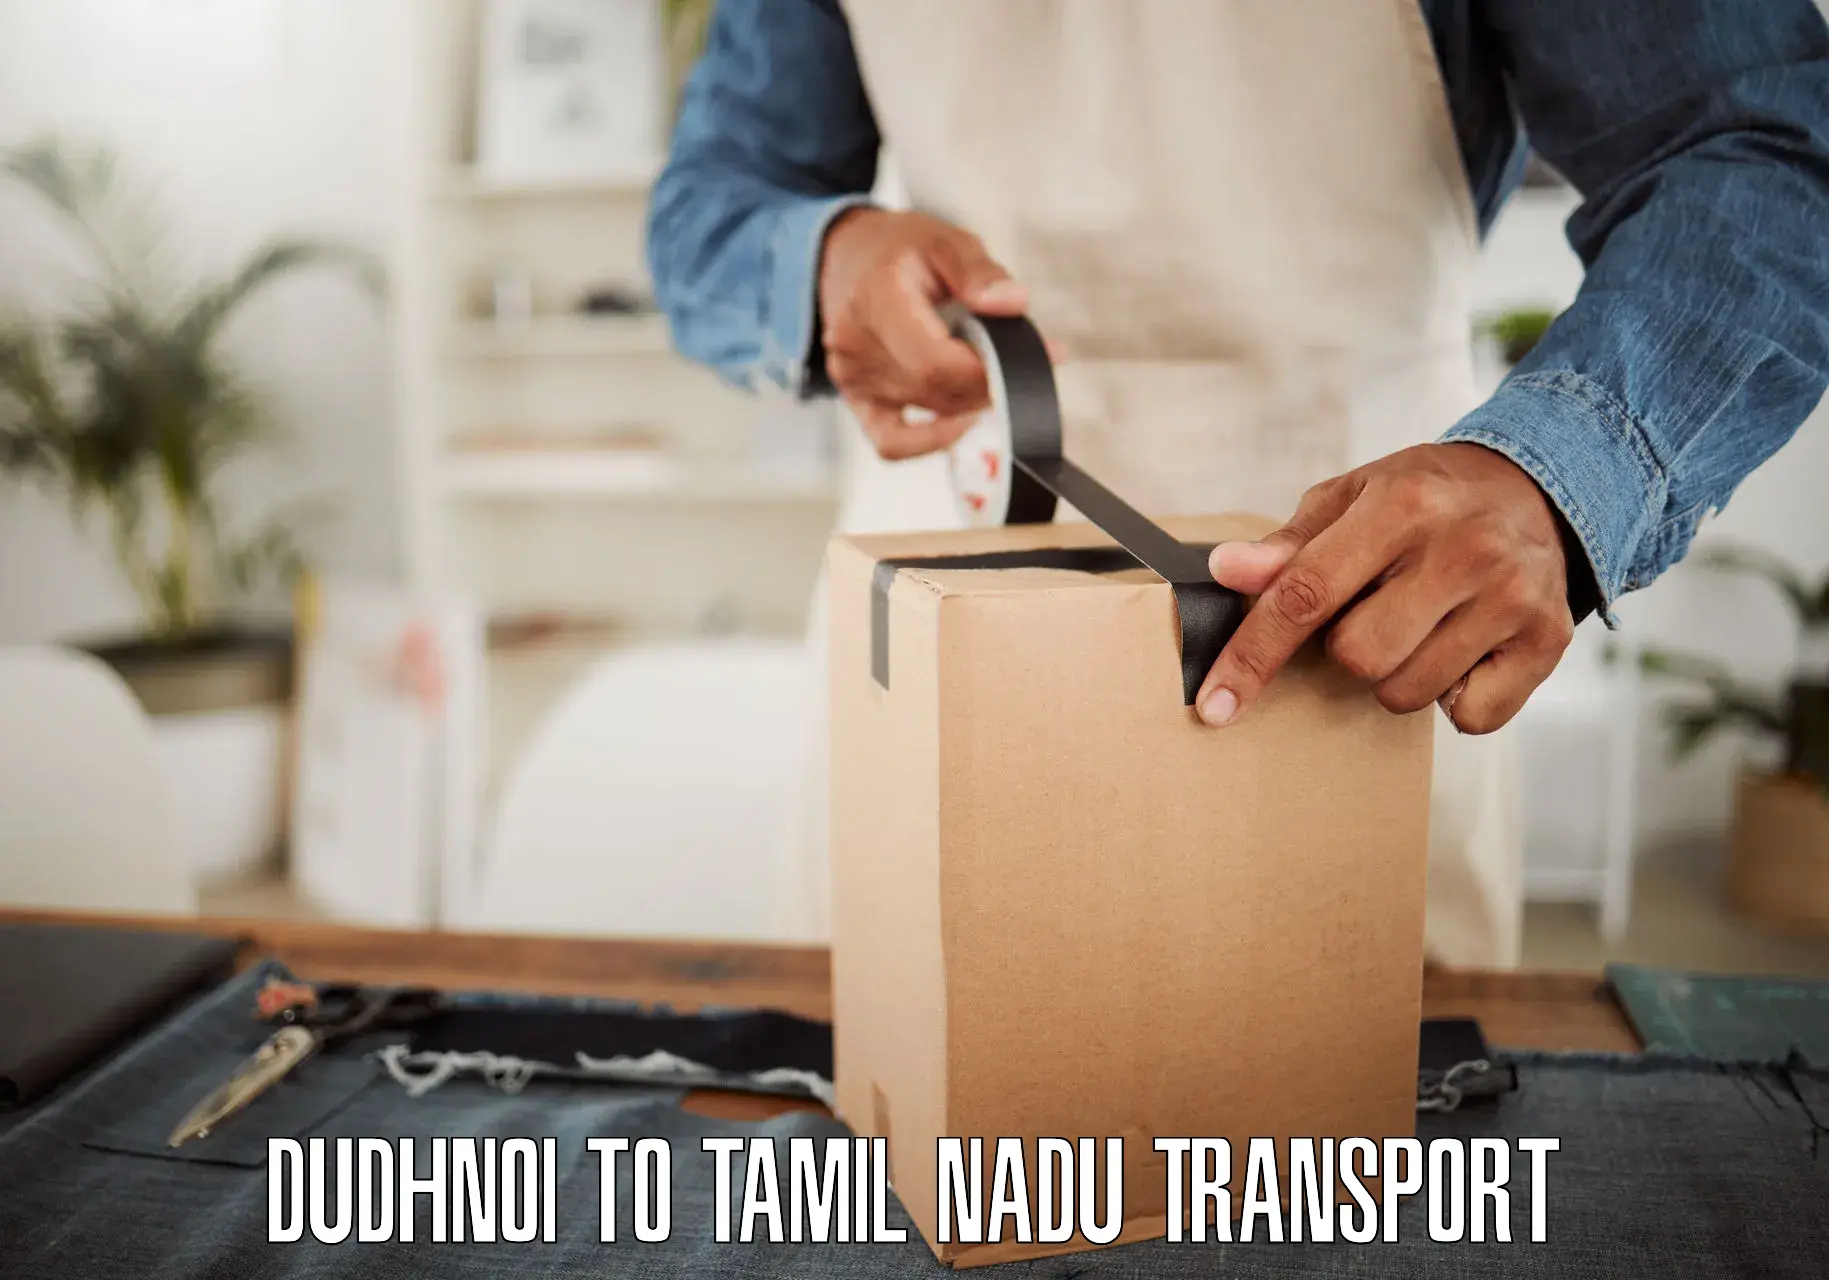 Express transport services Dudhnoi to Sri Ramachandra Institute of Higher Education and Research Chennai